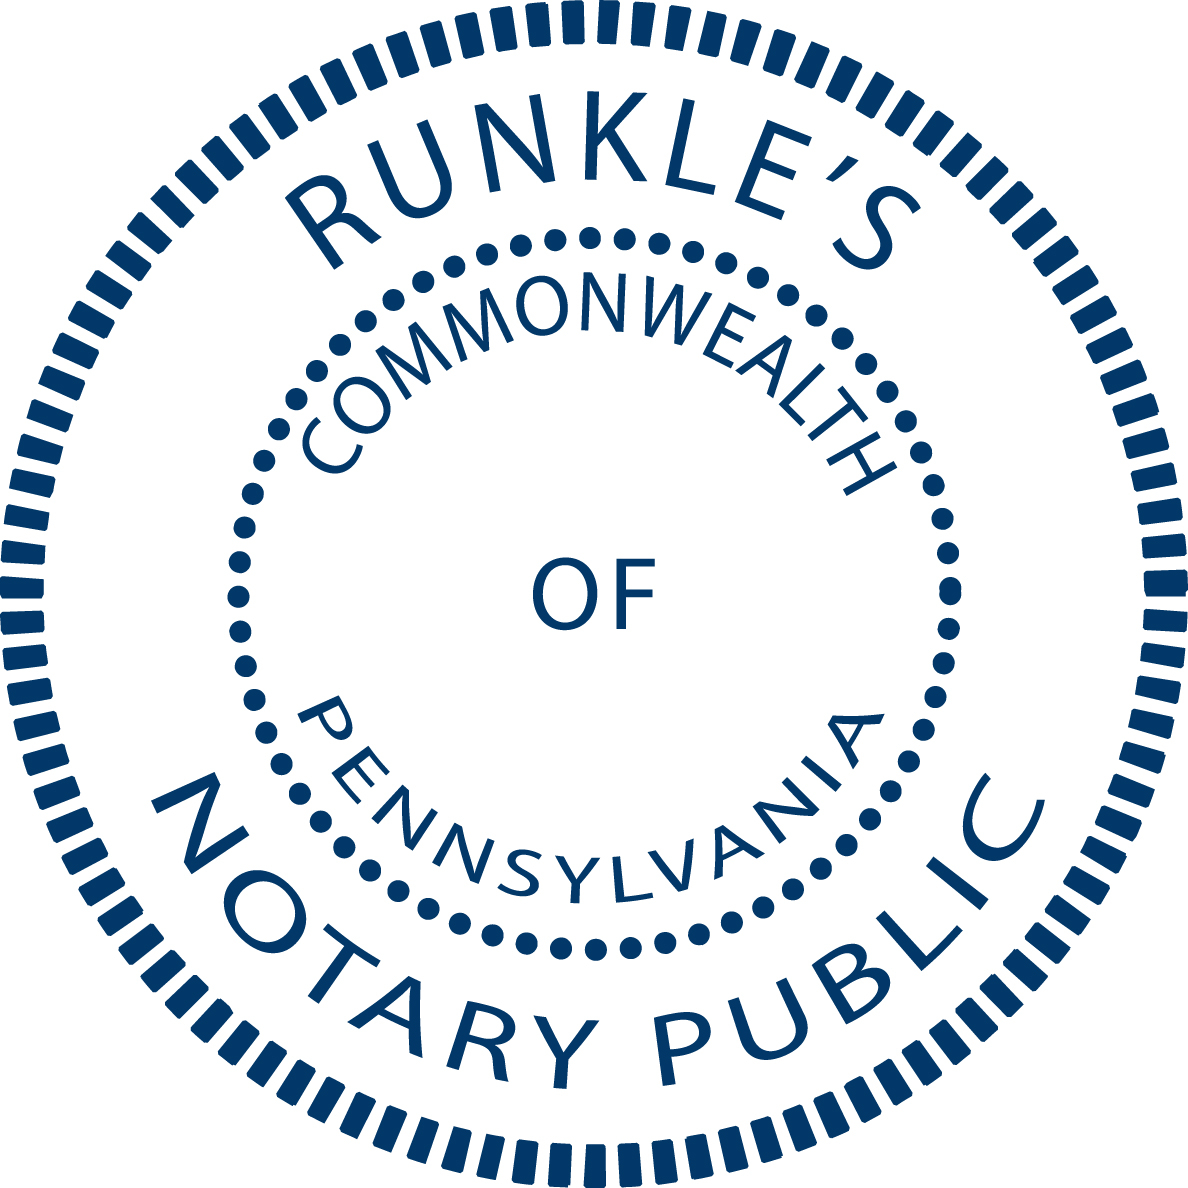 Runkle's Notary - Tag - Title Photo